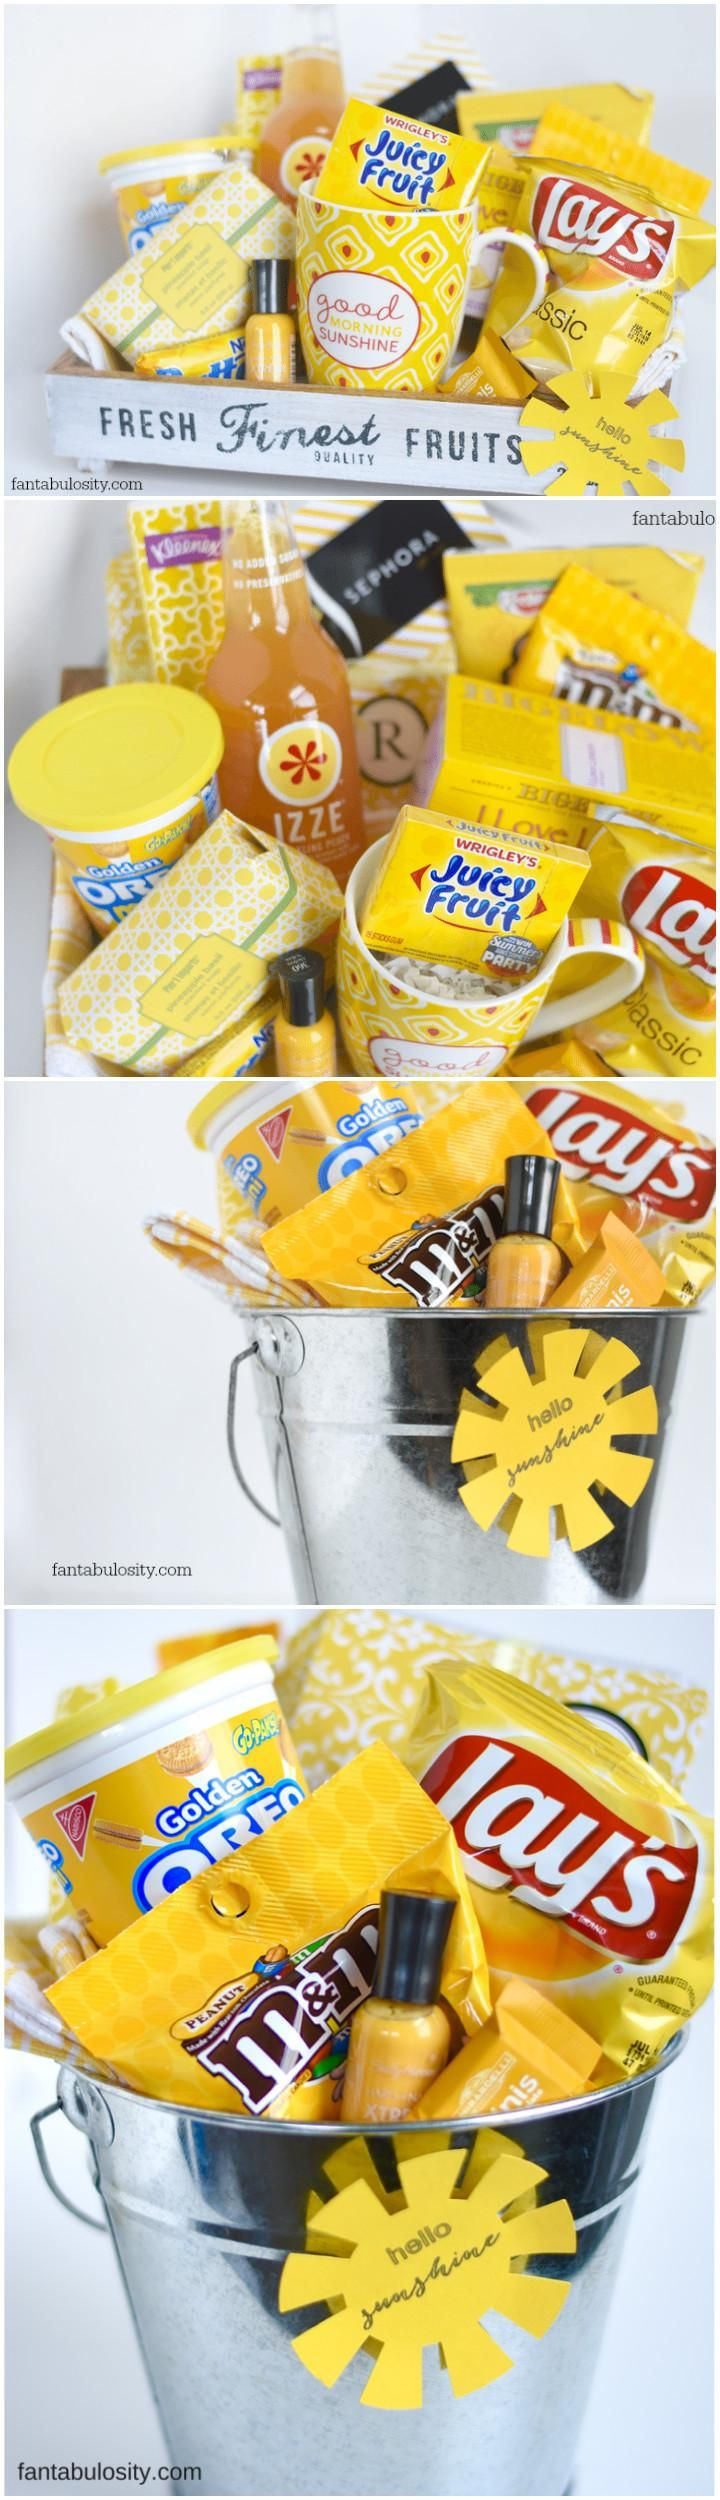 Ideas For Making Gift Baskets At Home
 70 Unique Gift Basket Ideas You Can Make At Home